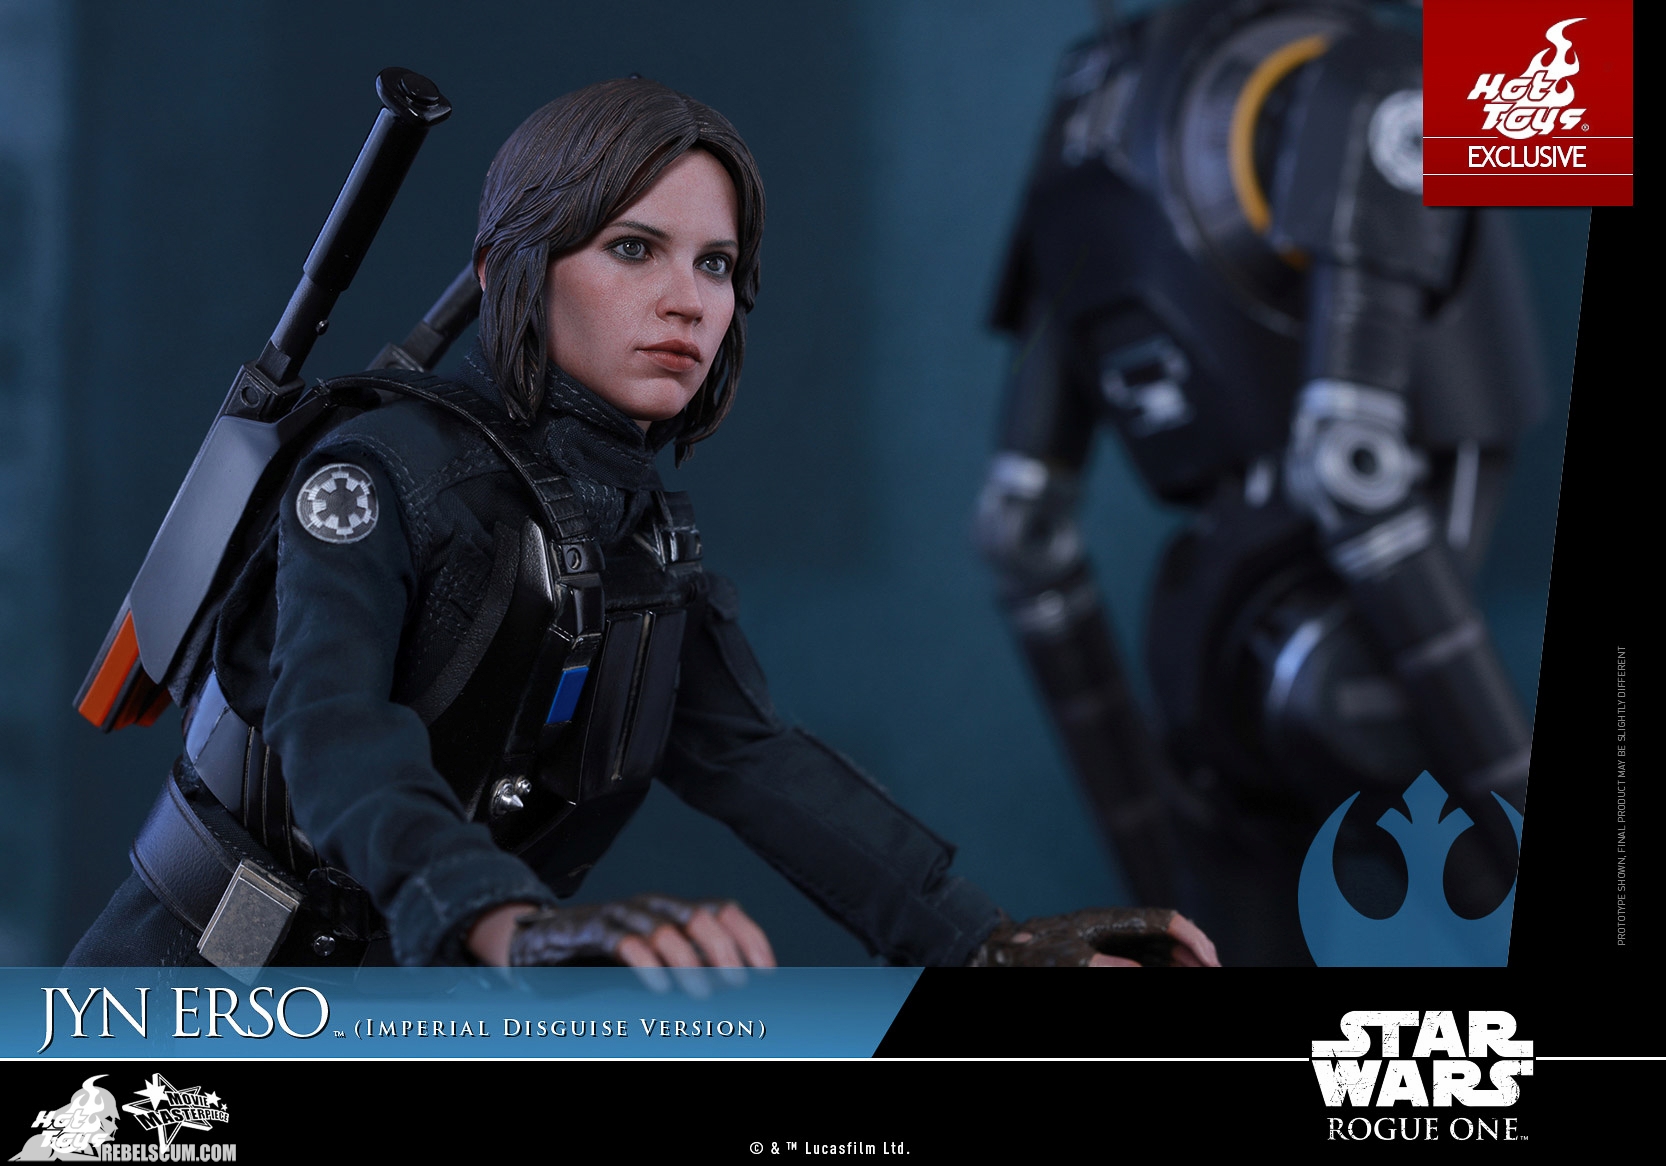 Hot-Toys-MMS419-Rogue-One-Jyn-Erso-Imperial-Disguise-013.jpg